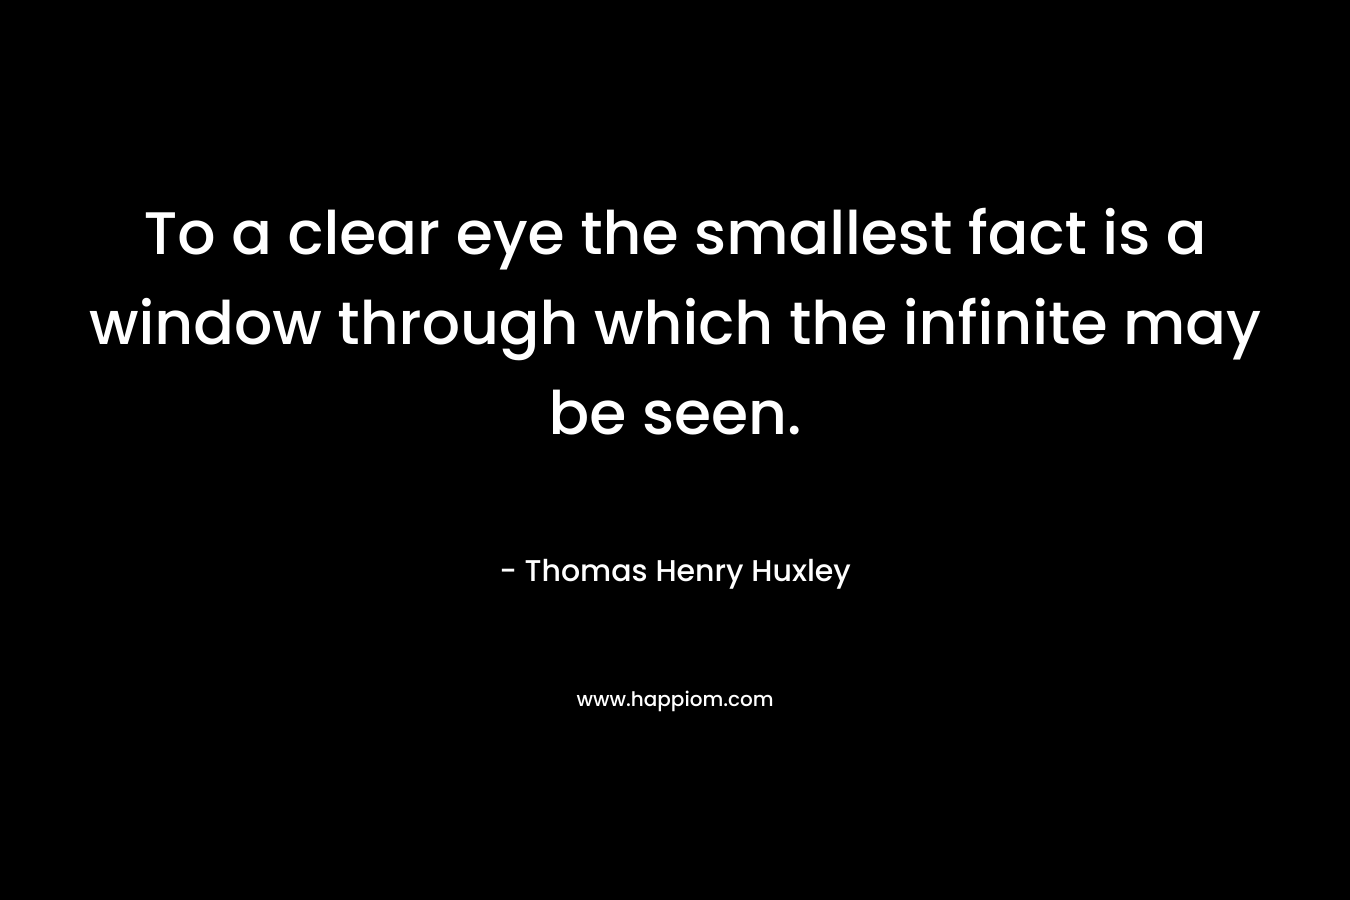 To a clear eye the smallest fact is a window through which the infinite may be seen.